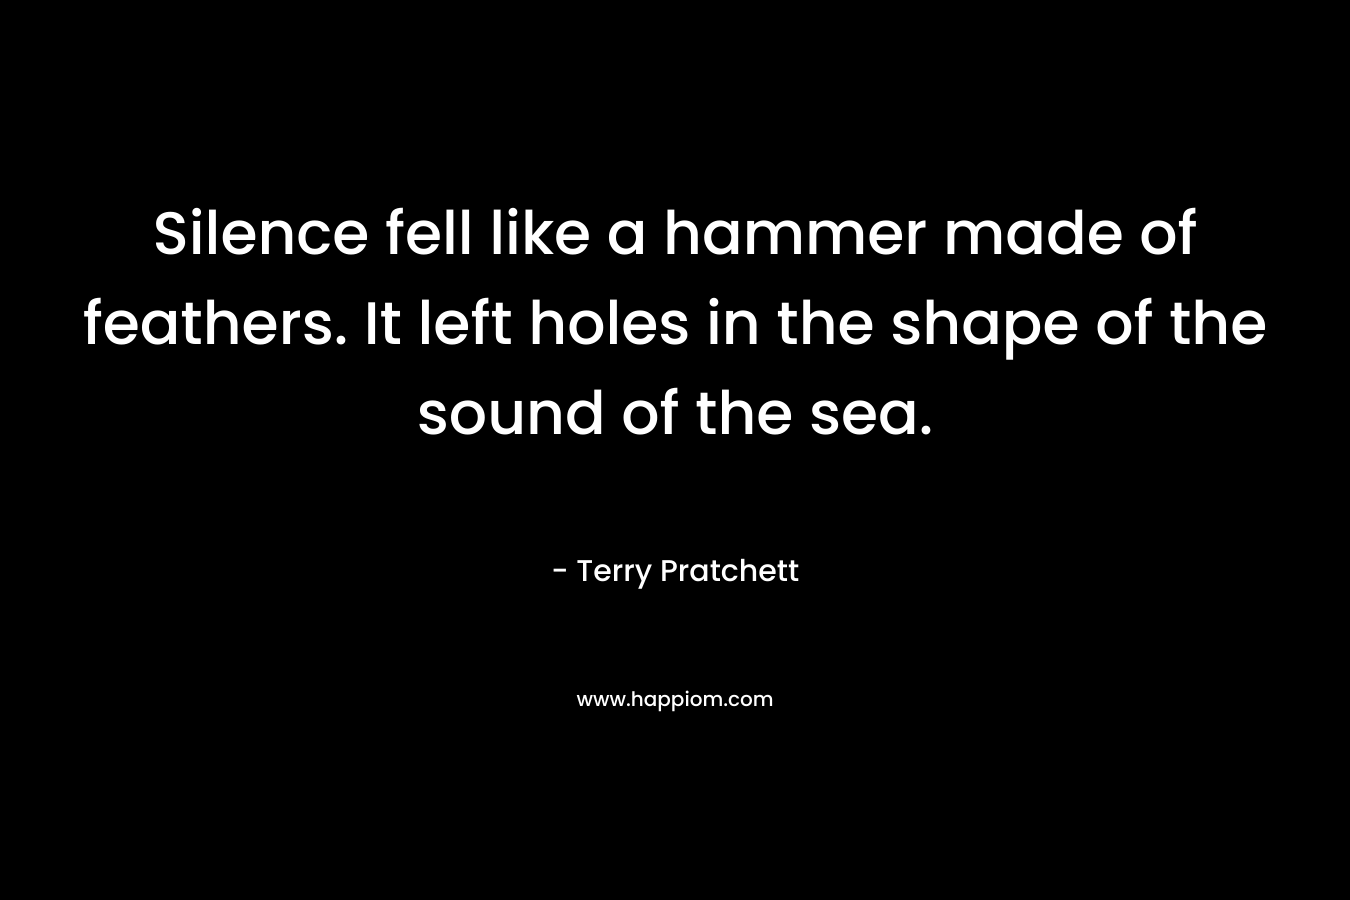 Silence fell like a hammer made of feathers. It left holes in the shape of the sound of the sea.